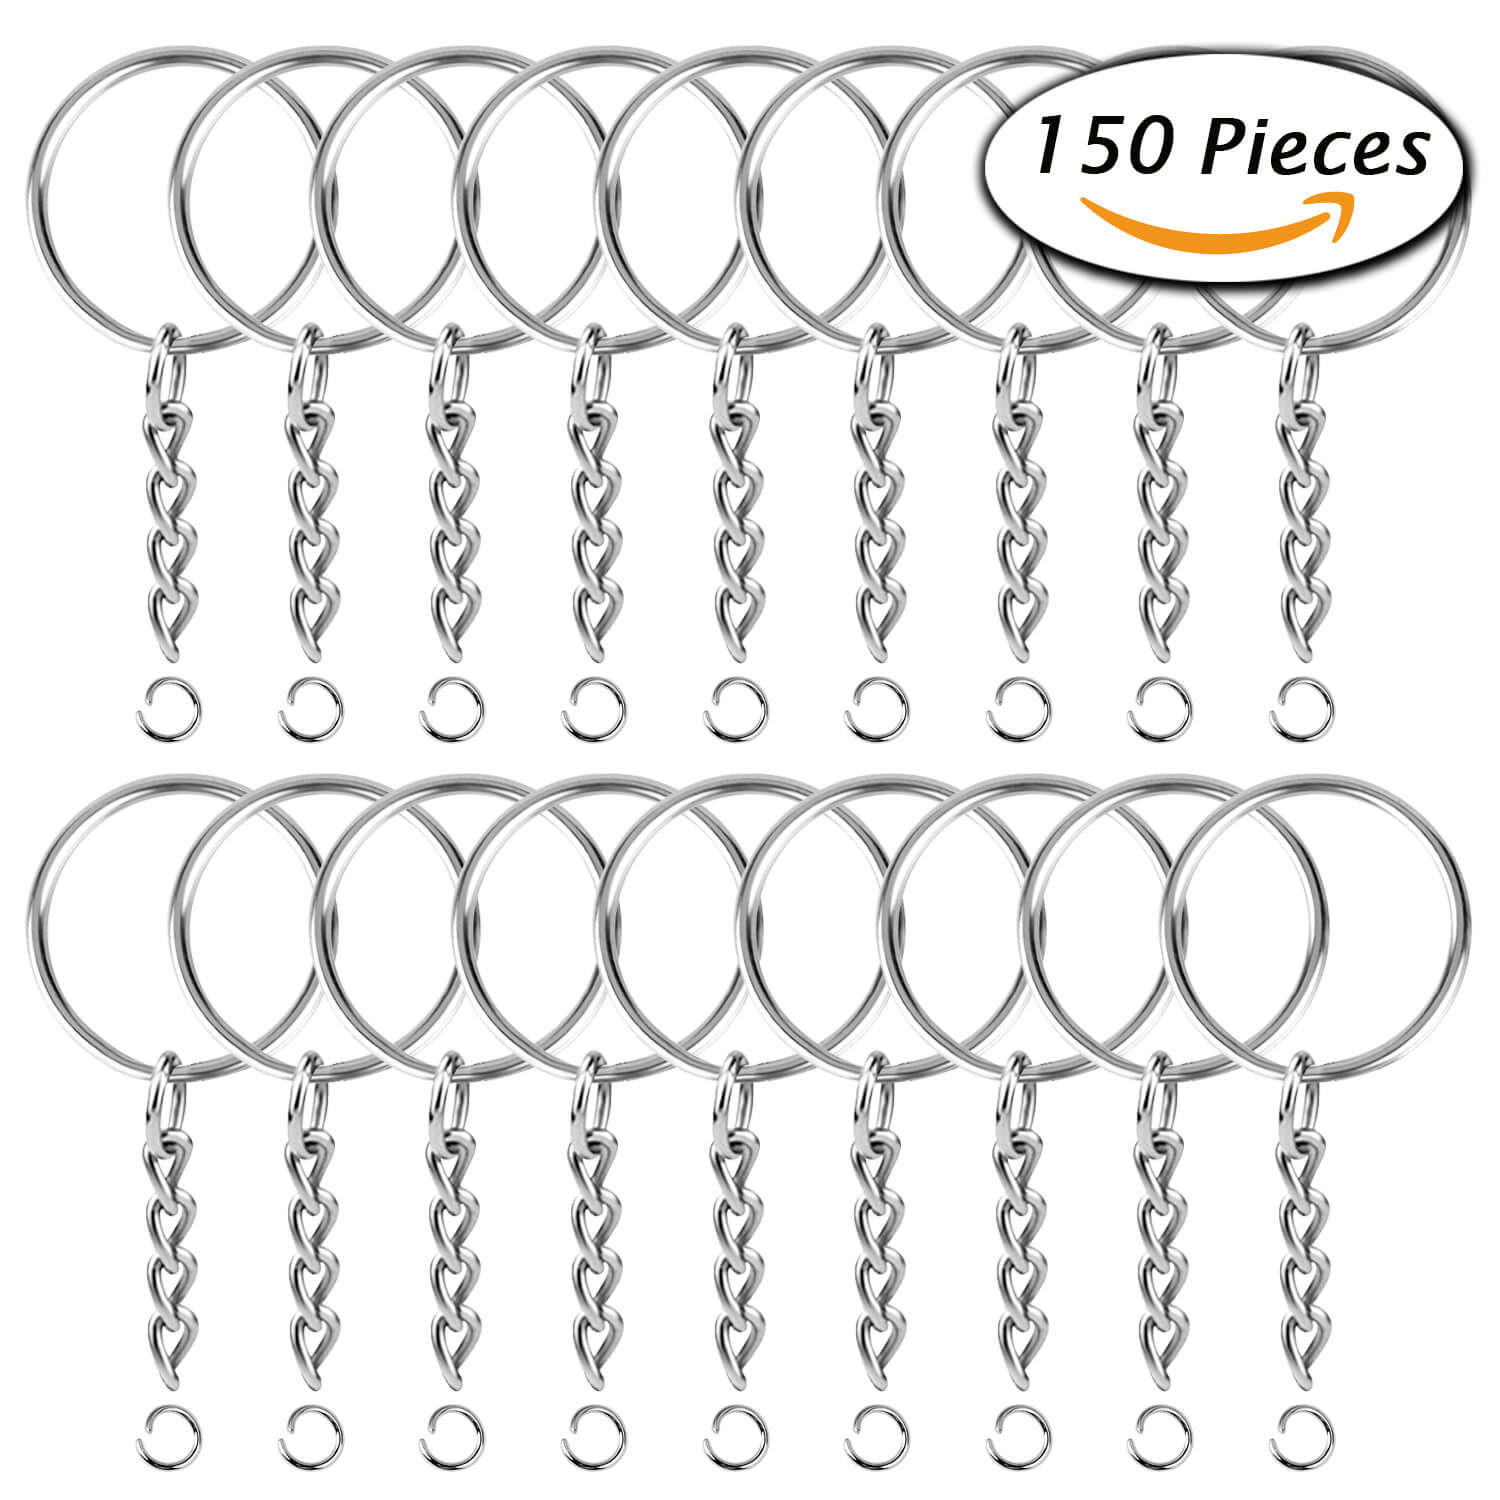 Keychain Rings Kit for Crafts Gold, PAXCOO Includes 100Pcs Split Key Ring  with Chain, 100pcs Jump Rings and 100pcs Screw Eye Pins for Resin Keychain